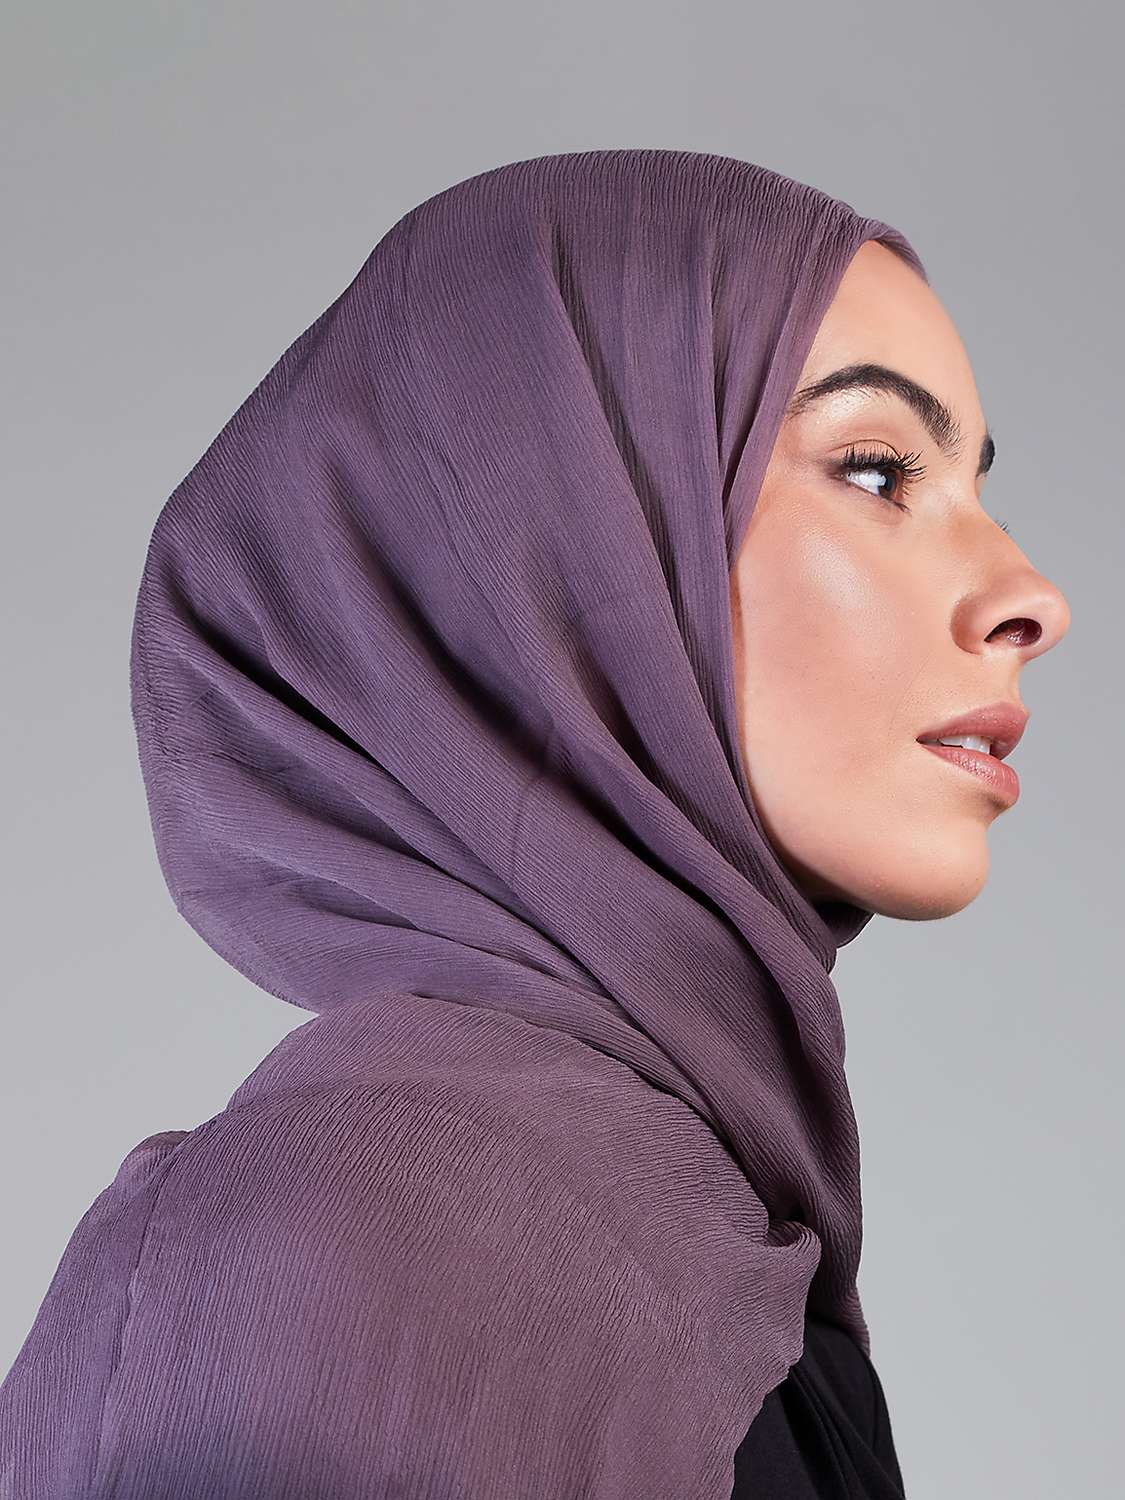 Buy Aab Silk Chiffon Ombre Hijab Online at johnlewis.com